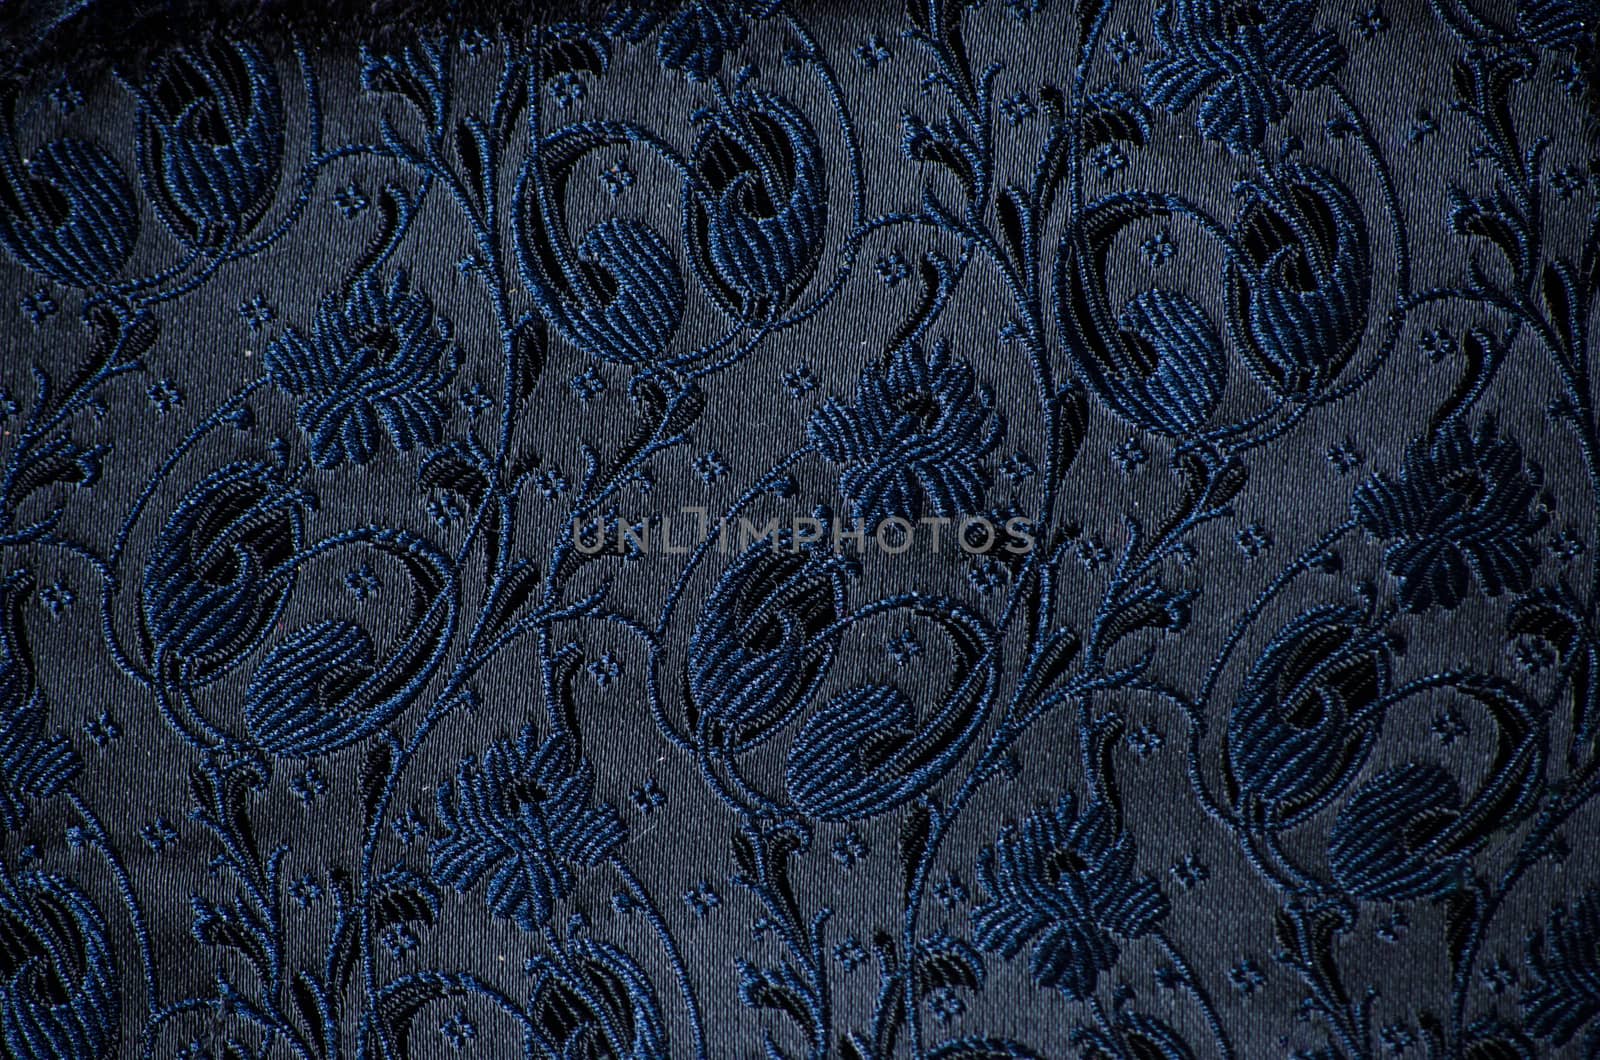 vintage brocade fabric detail by sarkao